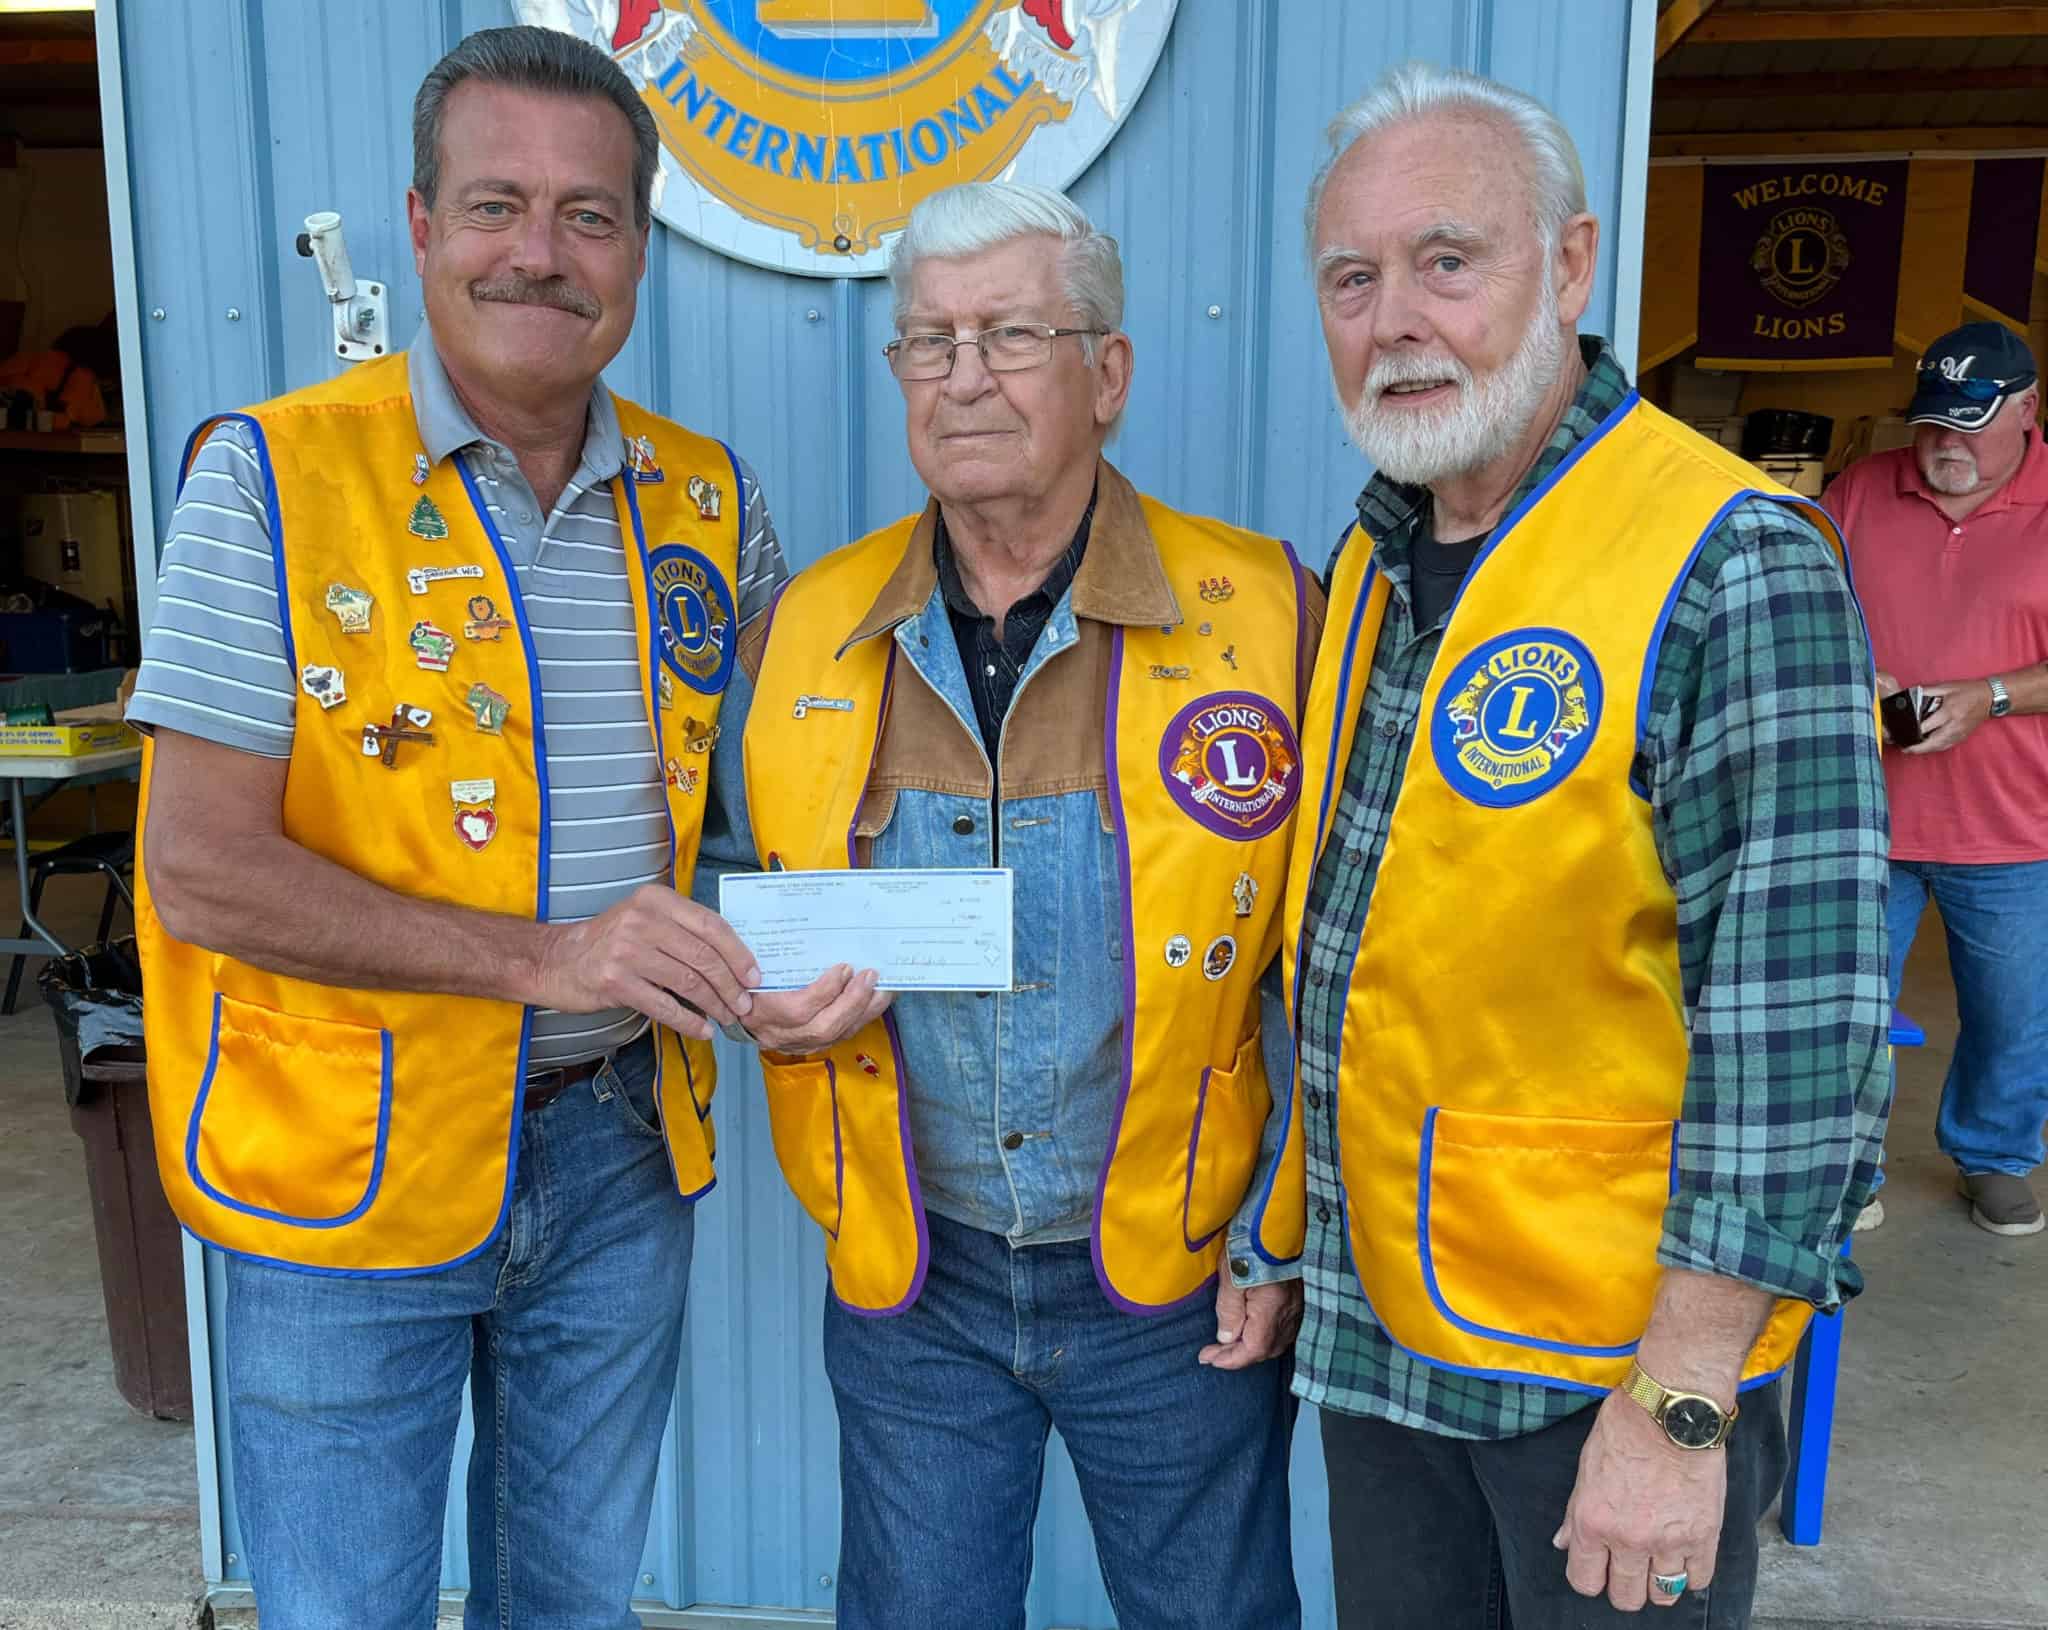 Tomahawk Lions Club receives $10,000.00 grant from Randy J. Hoegger Memorial Fund